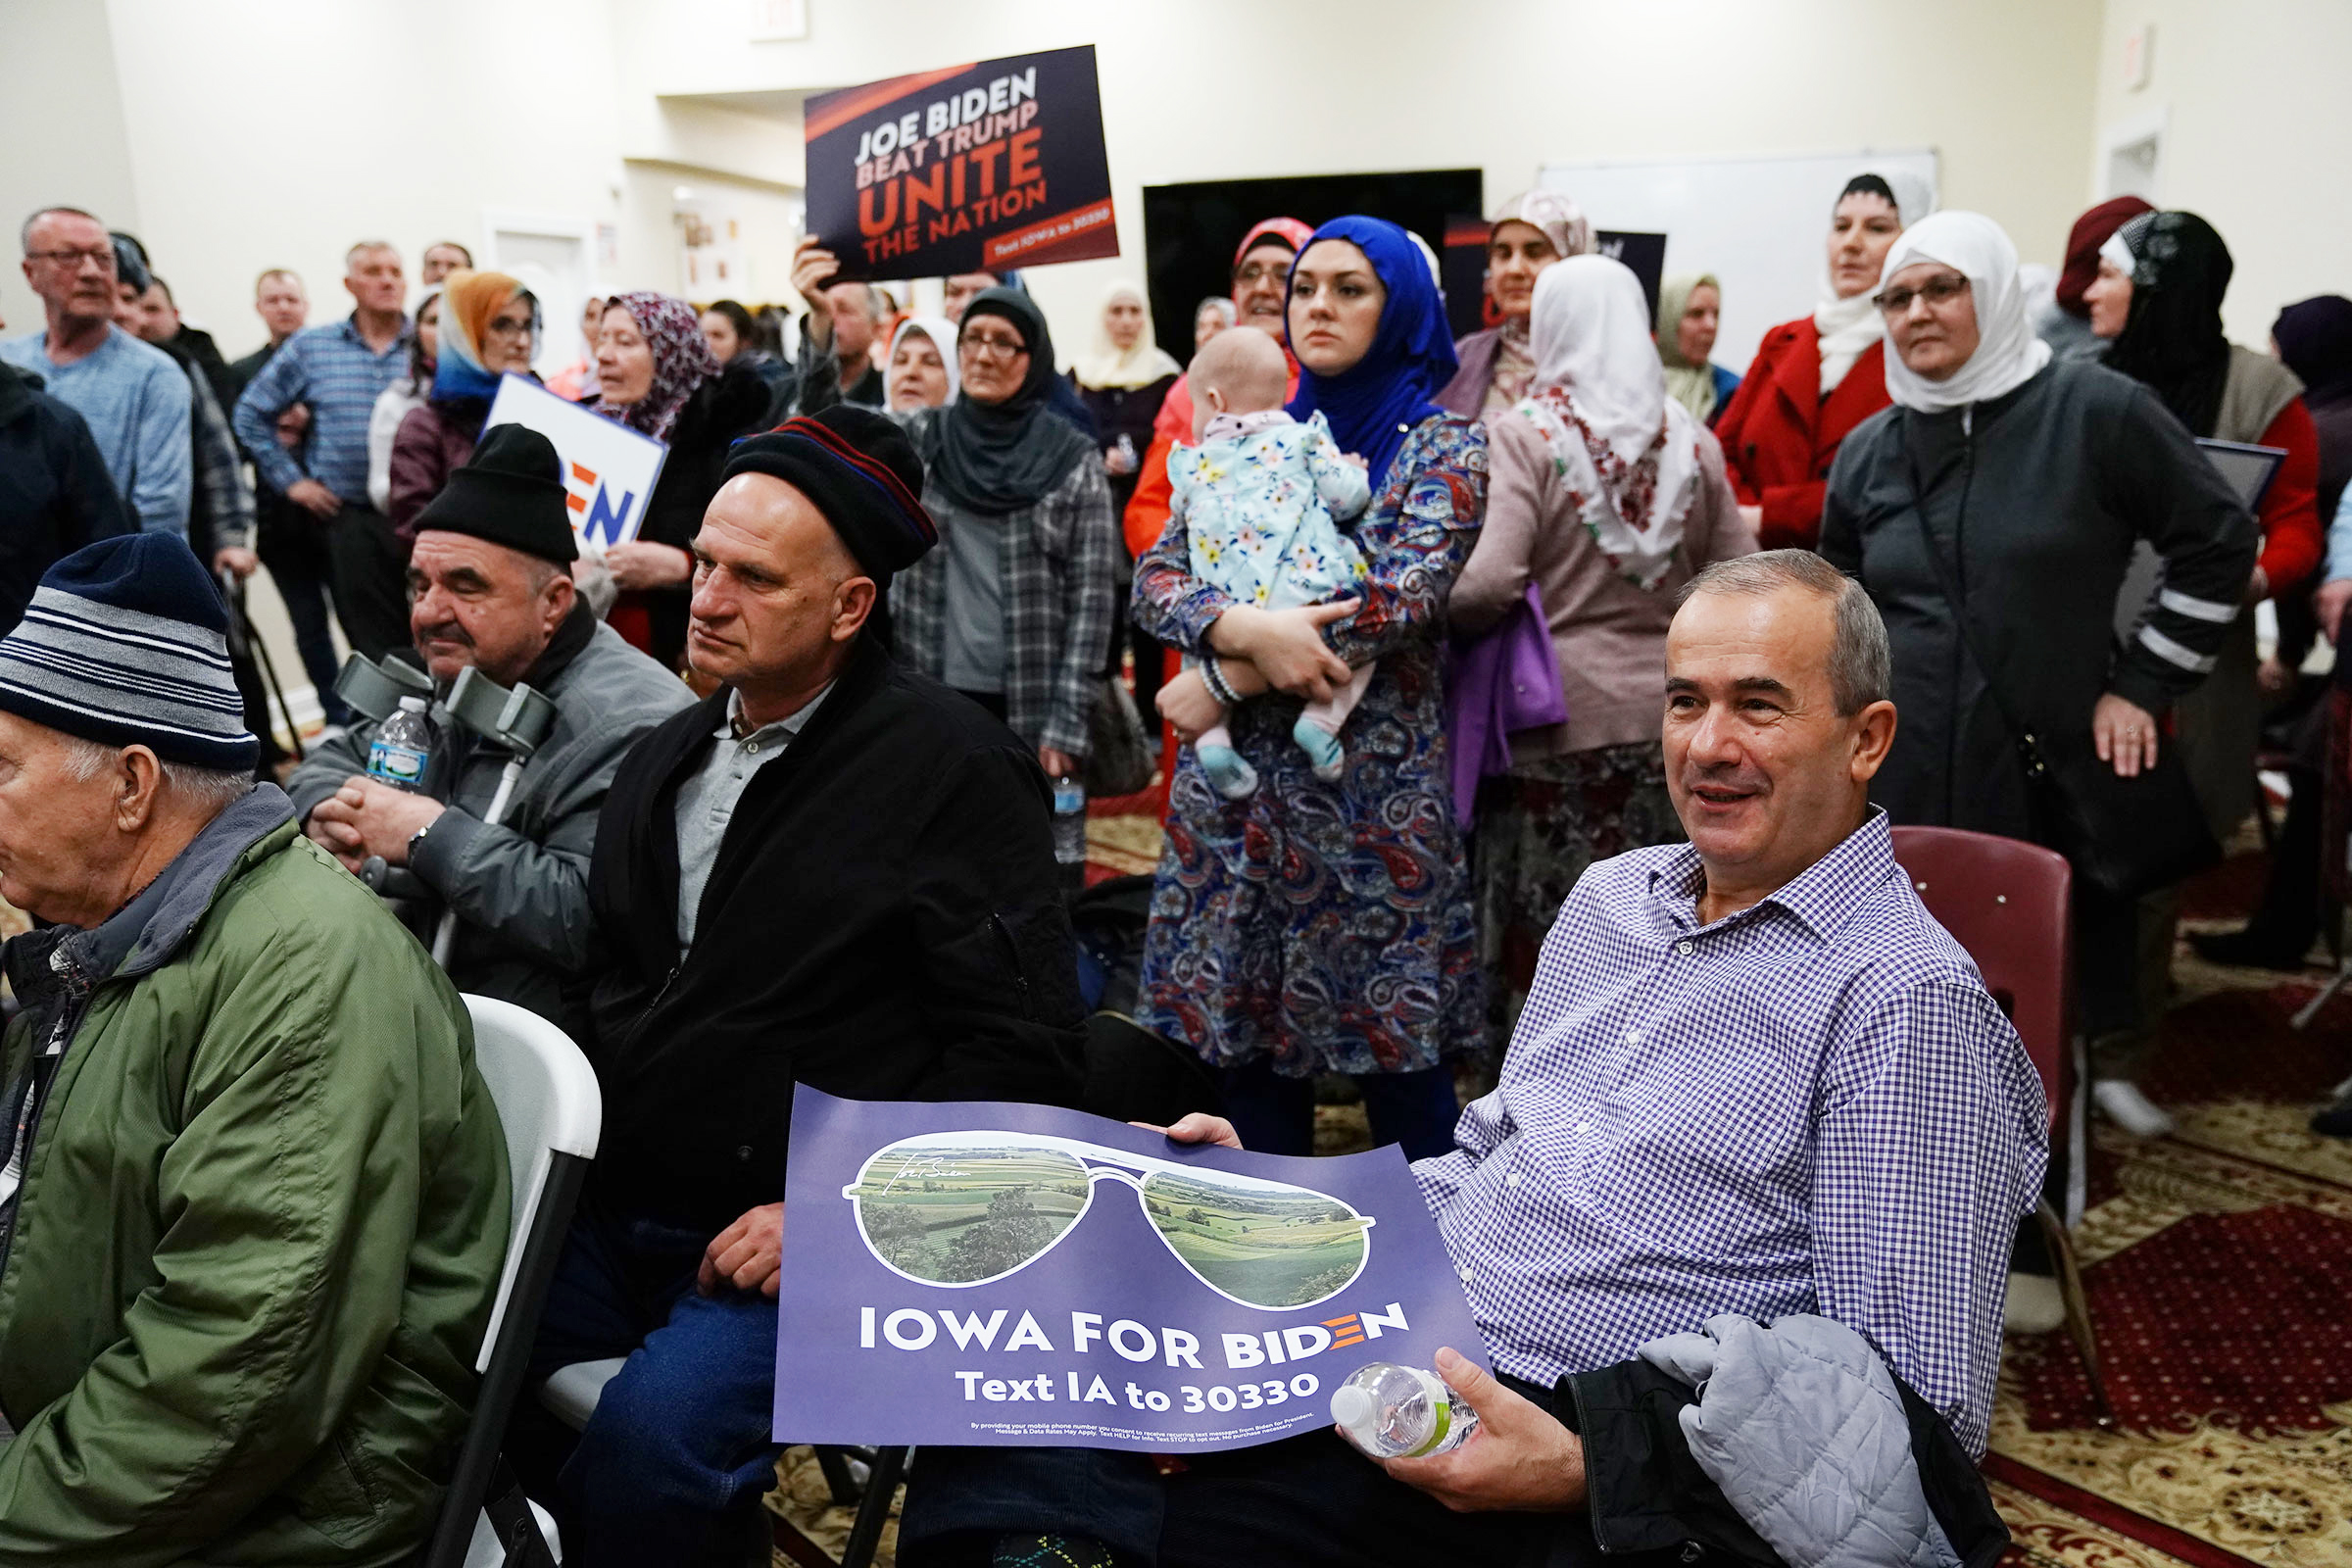 Participants hold campaign signs for Vice President Joe Biden during the first-in-the-nation Iowa caucus at the Islamic and Education Center Ezan mosque in Des Moines, Iowa on Feb. 3, 2020. (Elijah Nouvelage—Bloomberg/Getty Images)